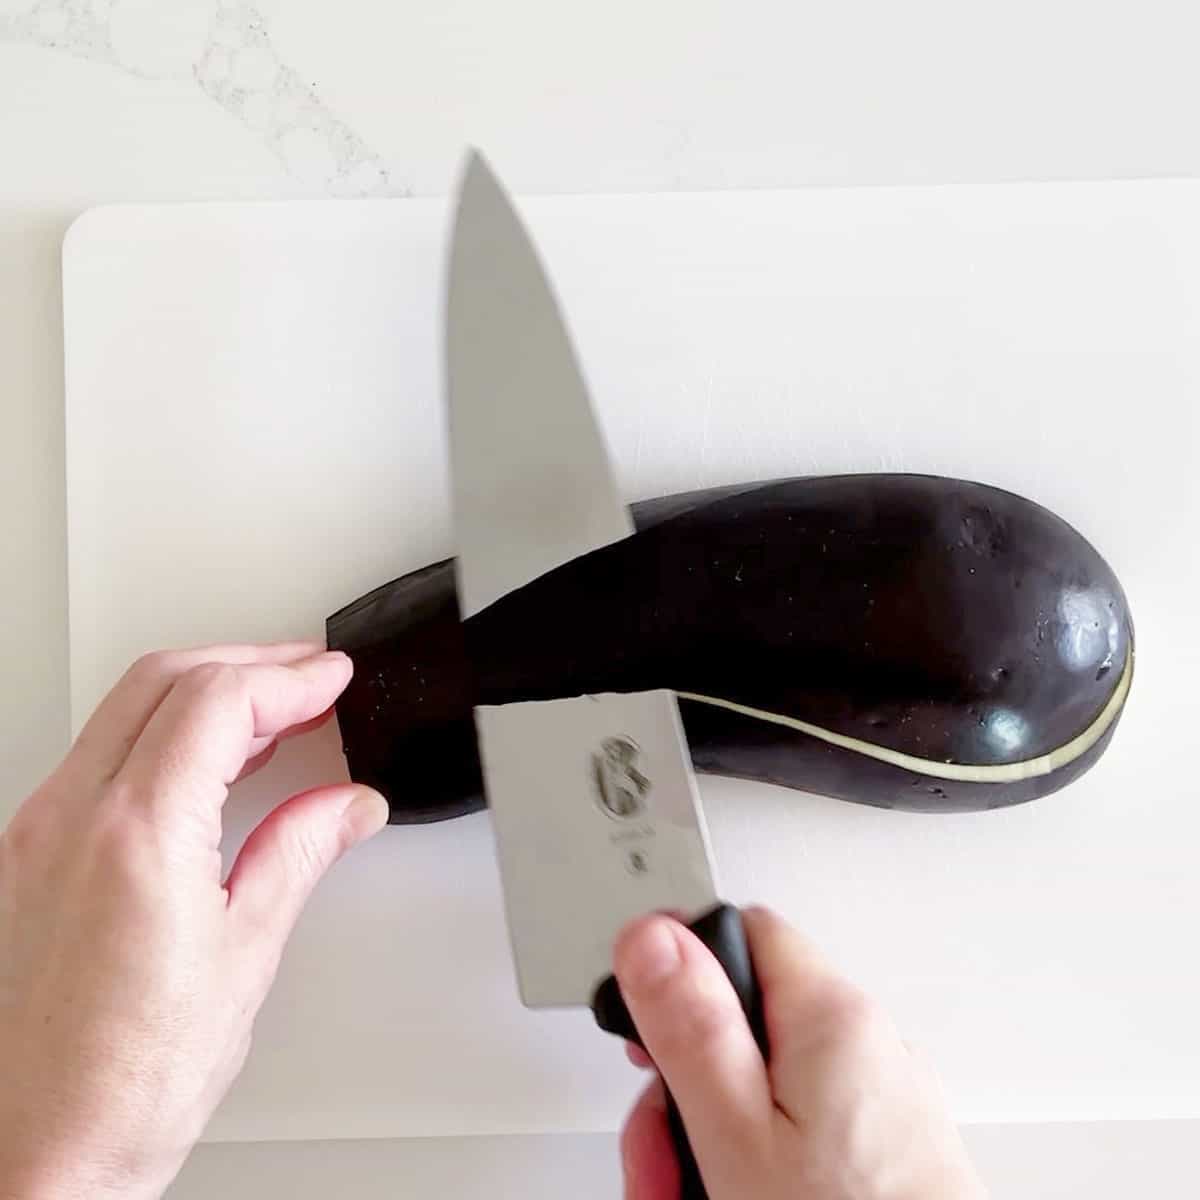 Slicing a thin strip off the rounded edges of the eggplant.